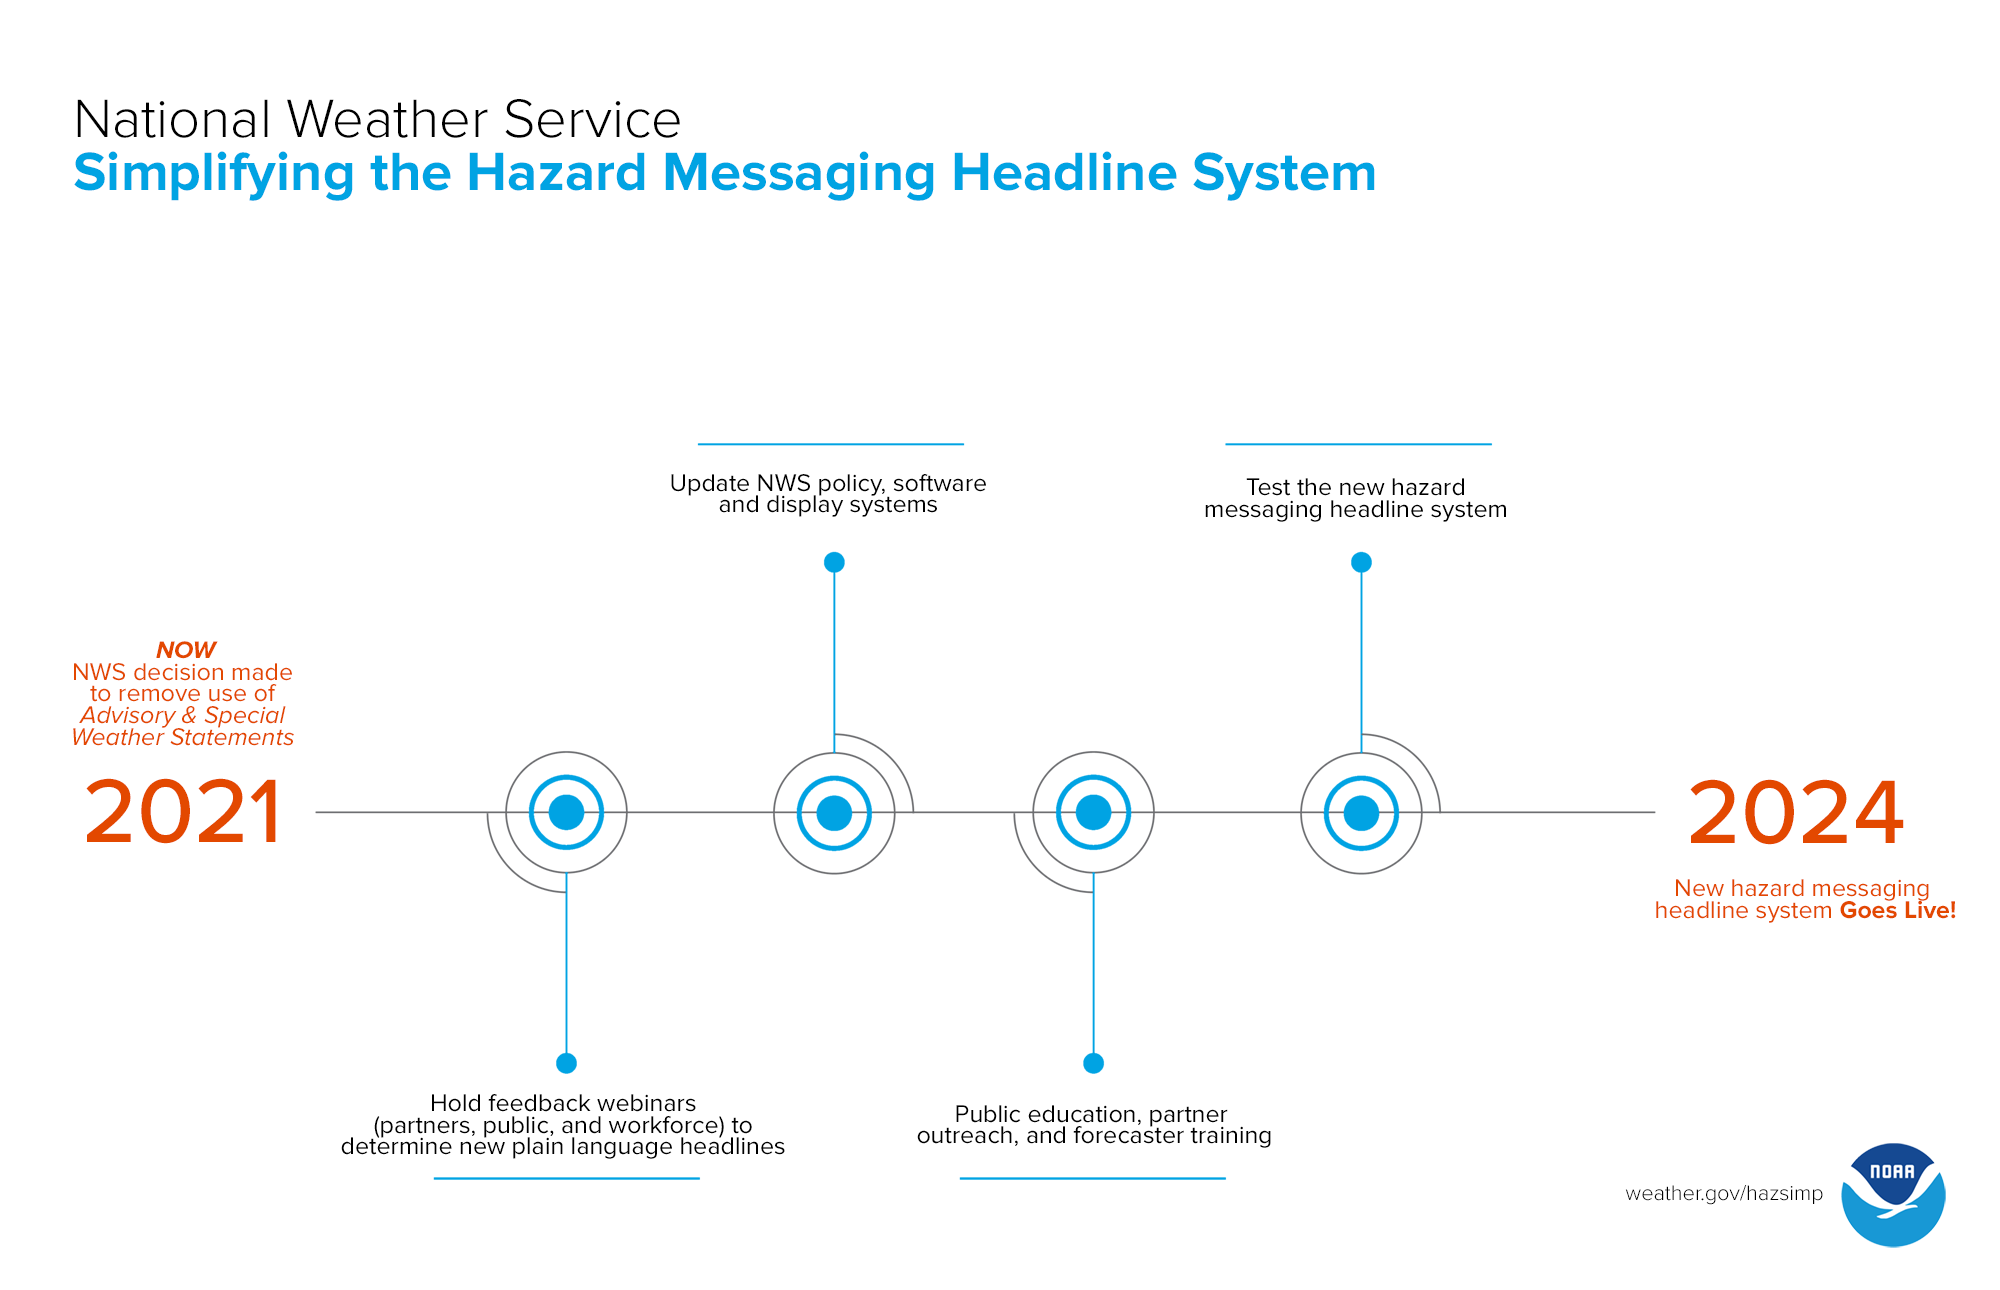 Shown here is the timeline moving forward for major changes to NWS hazard messaging headlines.